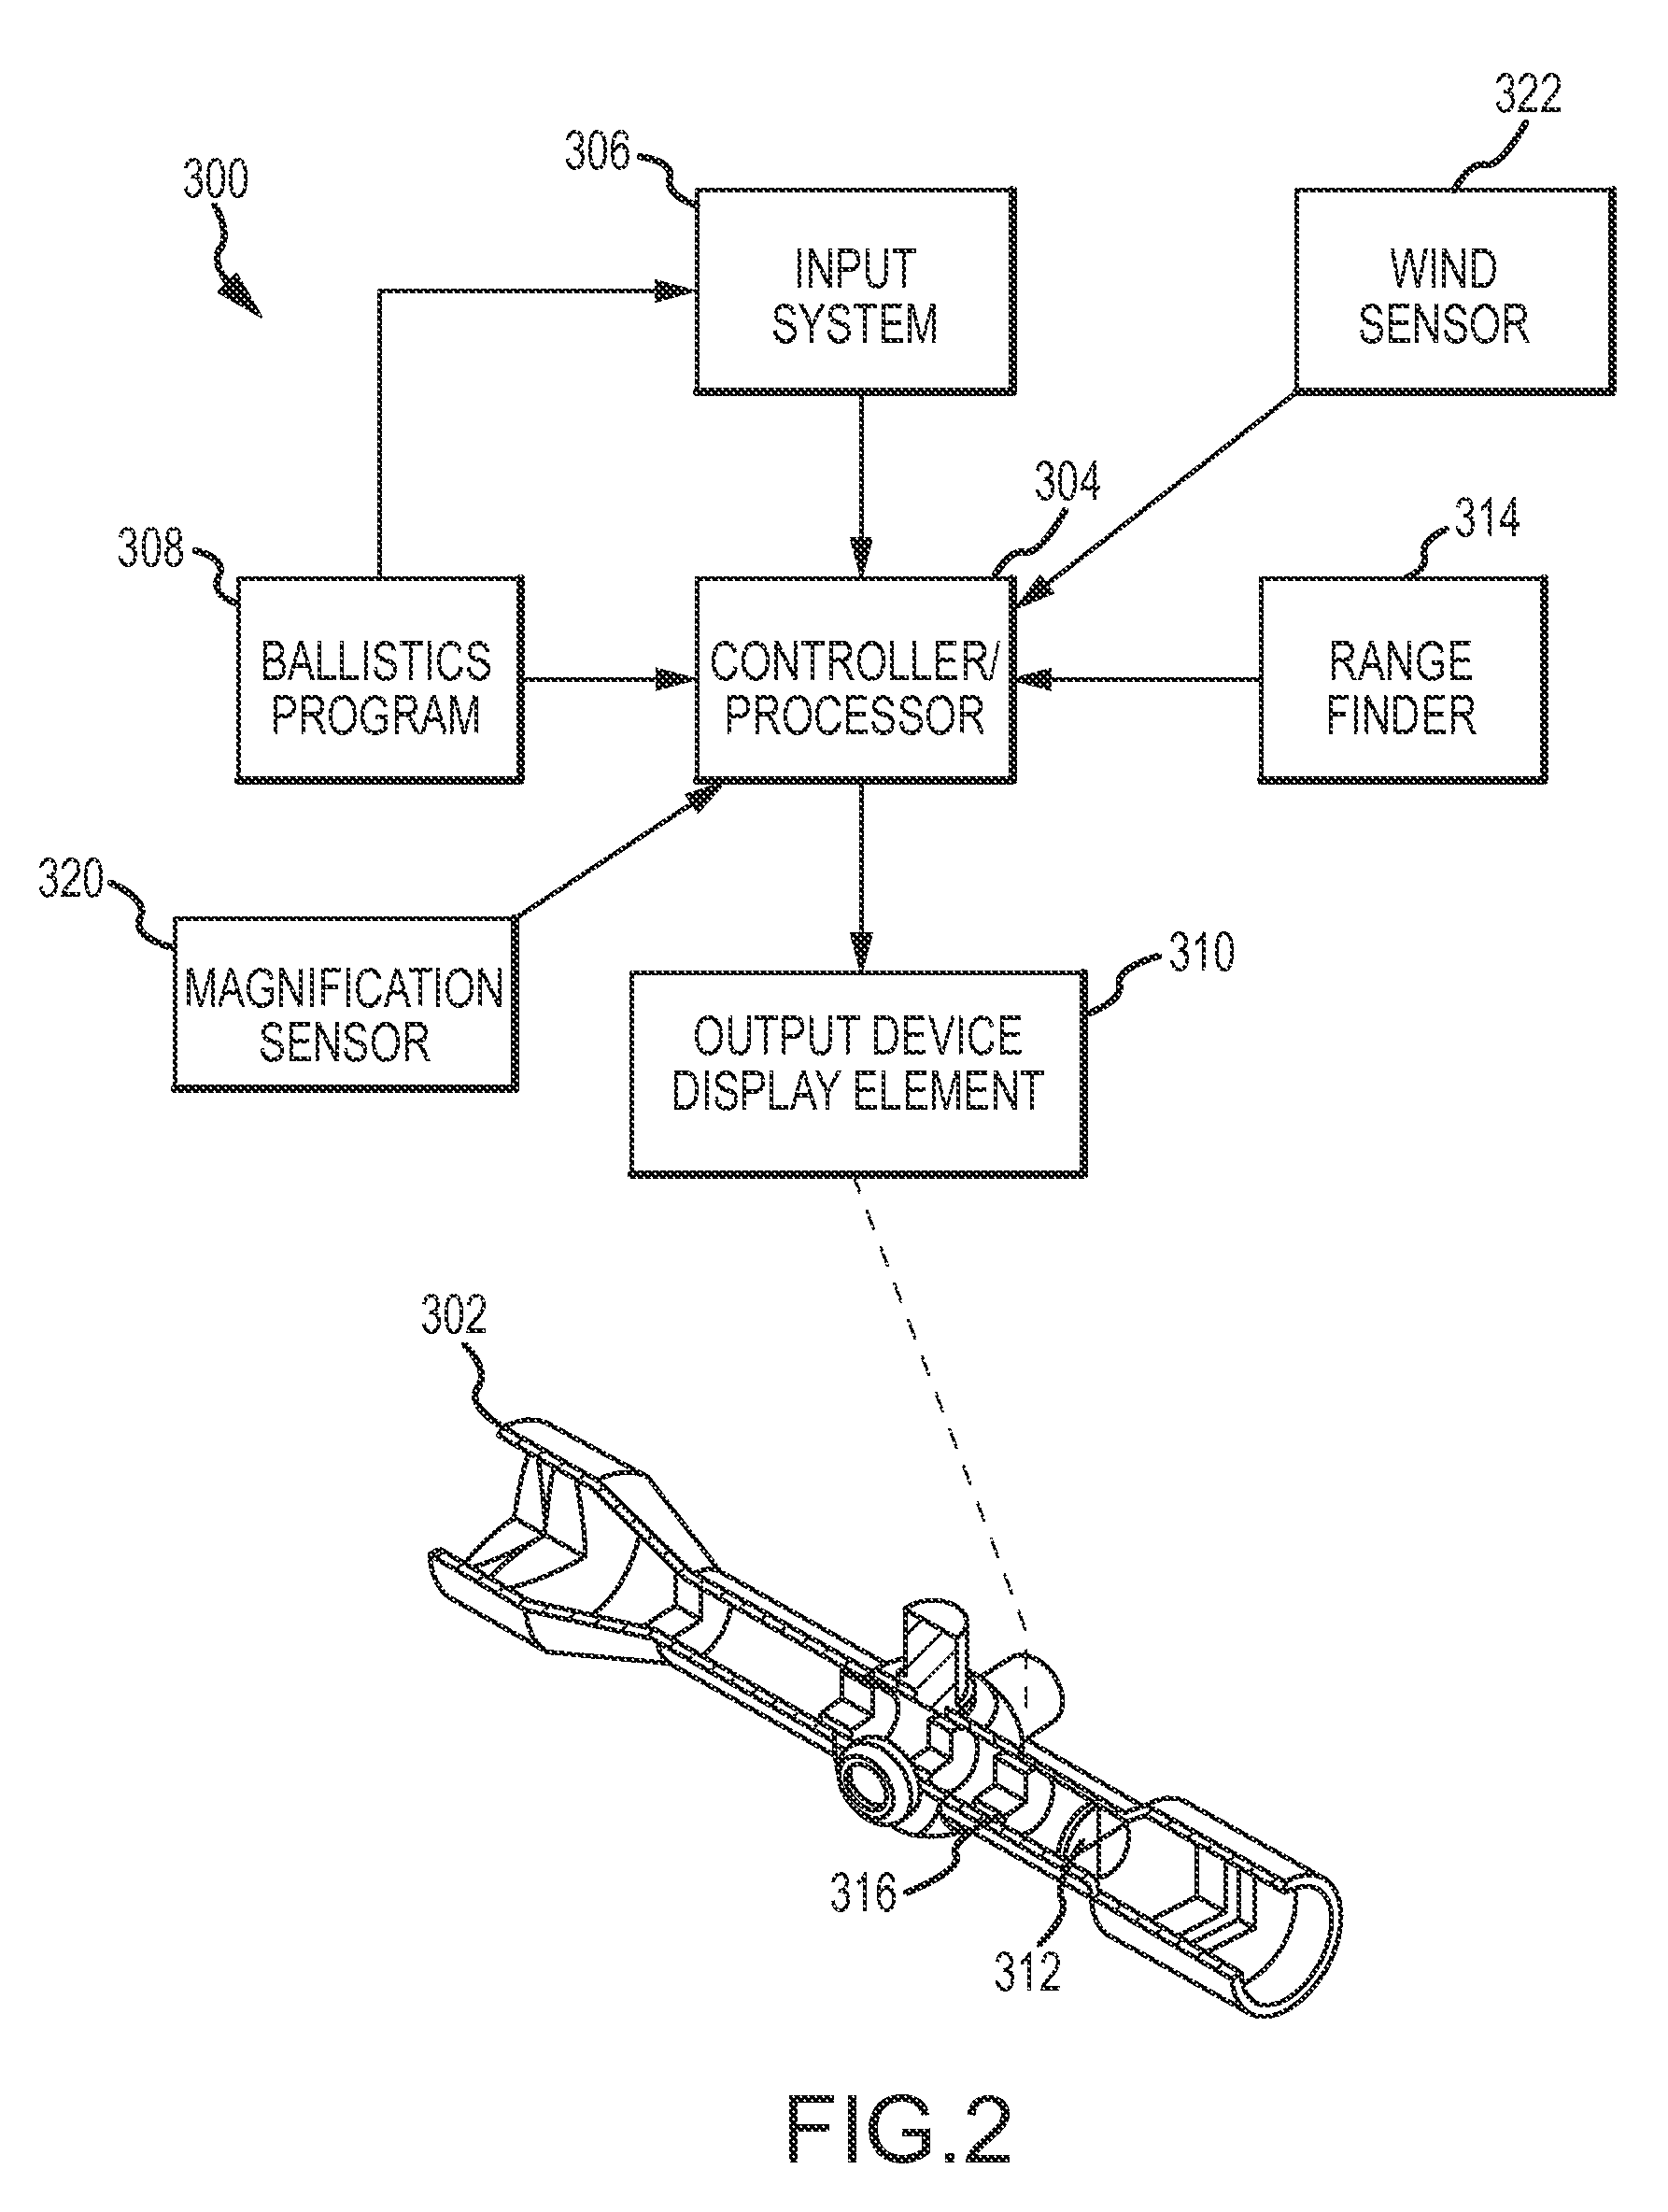 Optical device having projected aiming point